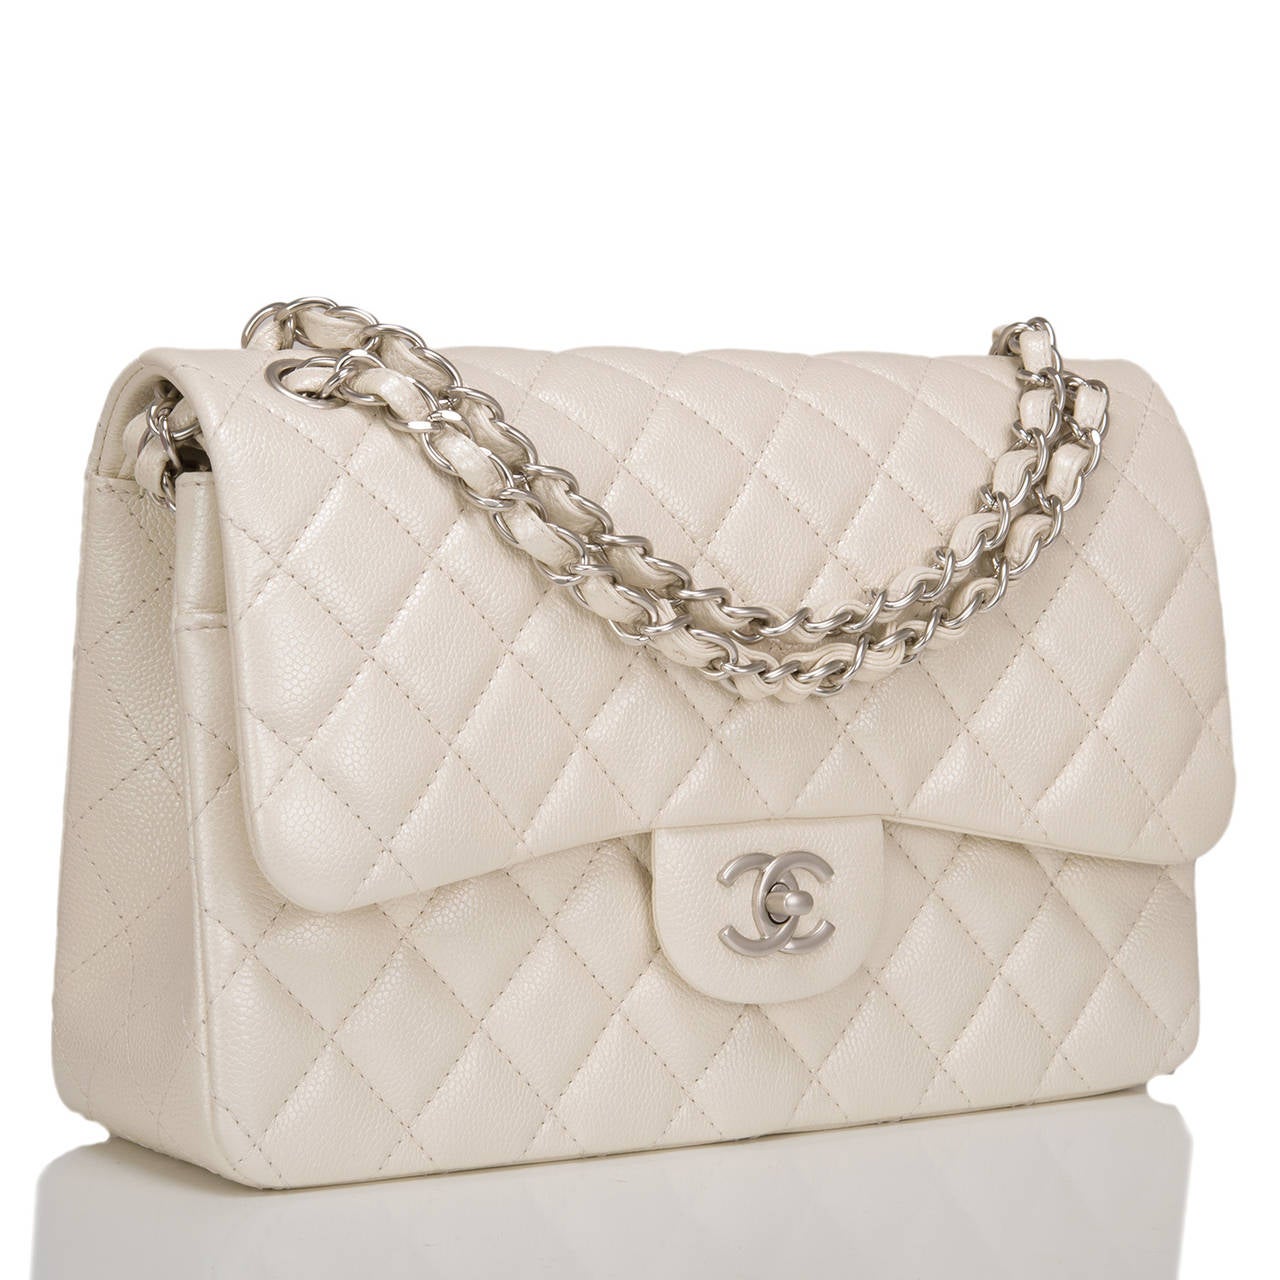 Chanel Jumbo Classic in pearlescent ivory caviar leather with matte silver tone hardware; featuring a front flap with signature CC turnlock closure, half moon back pocket, and an adjustable interwoven silver tone chain link and ivory leather